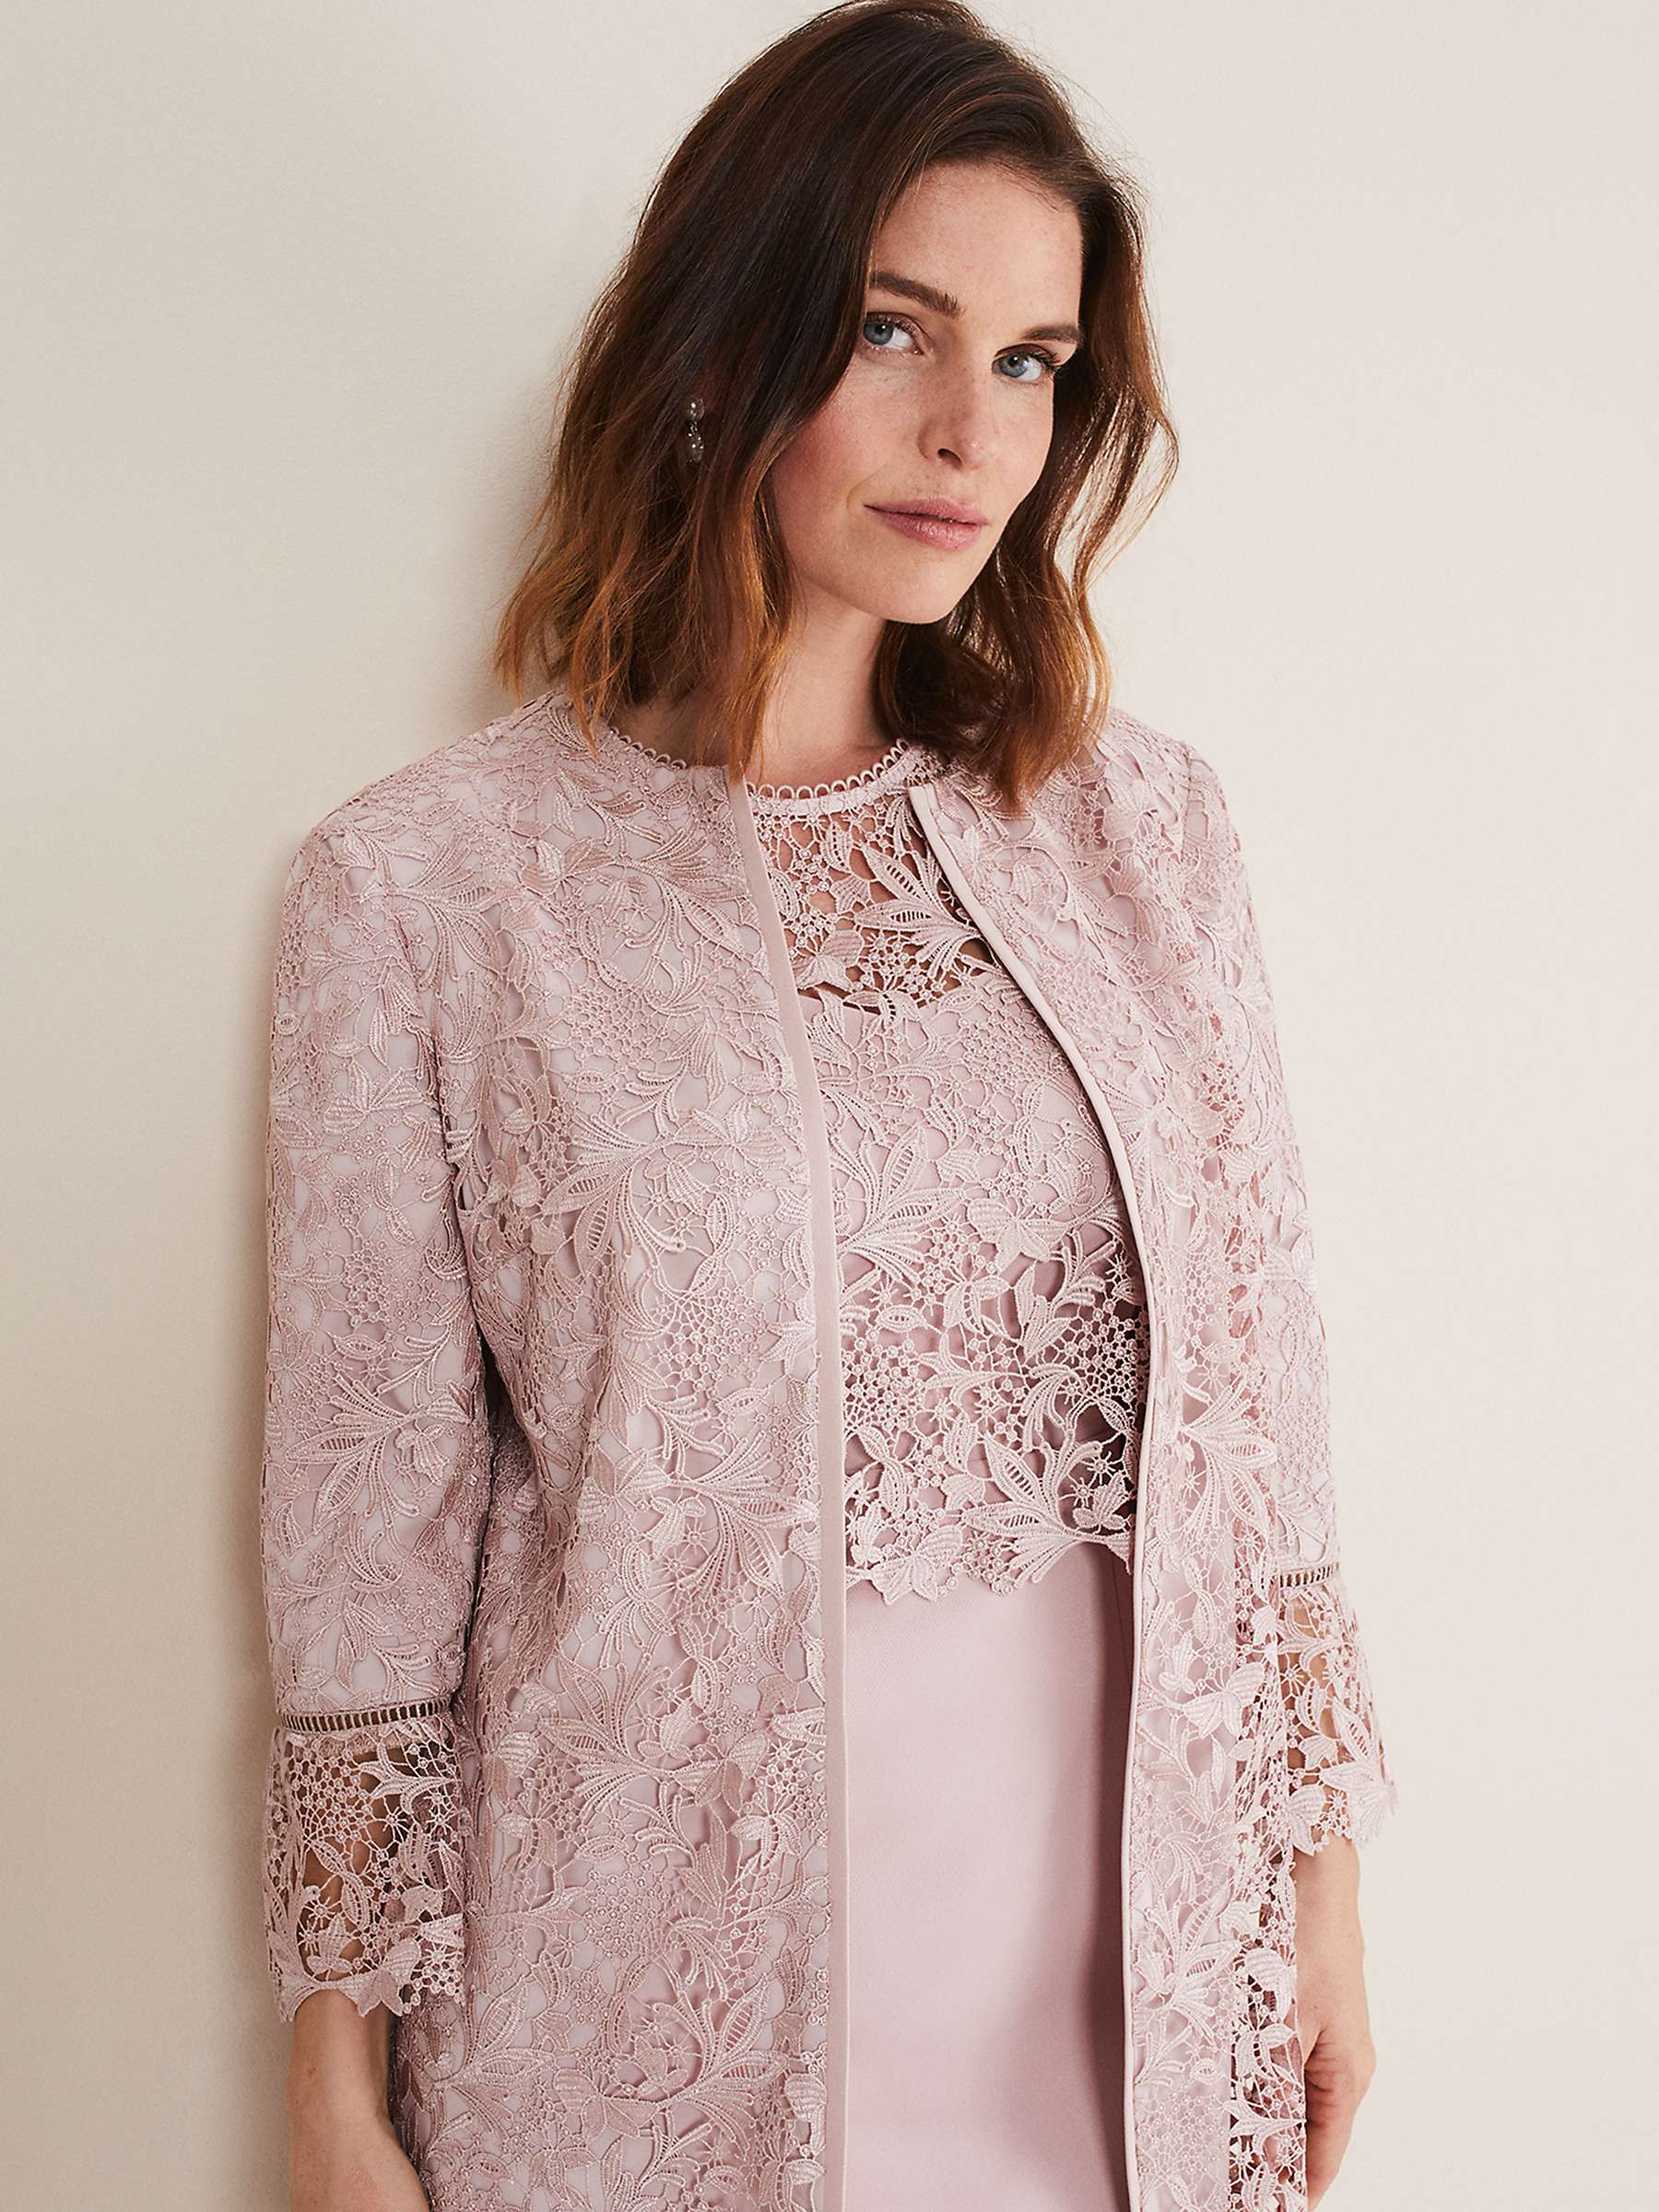 Buy Phase Eight Isabella Lace Coat, Antique Rose Online at johnlewis.com